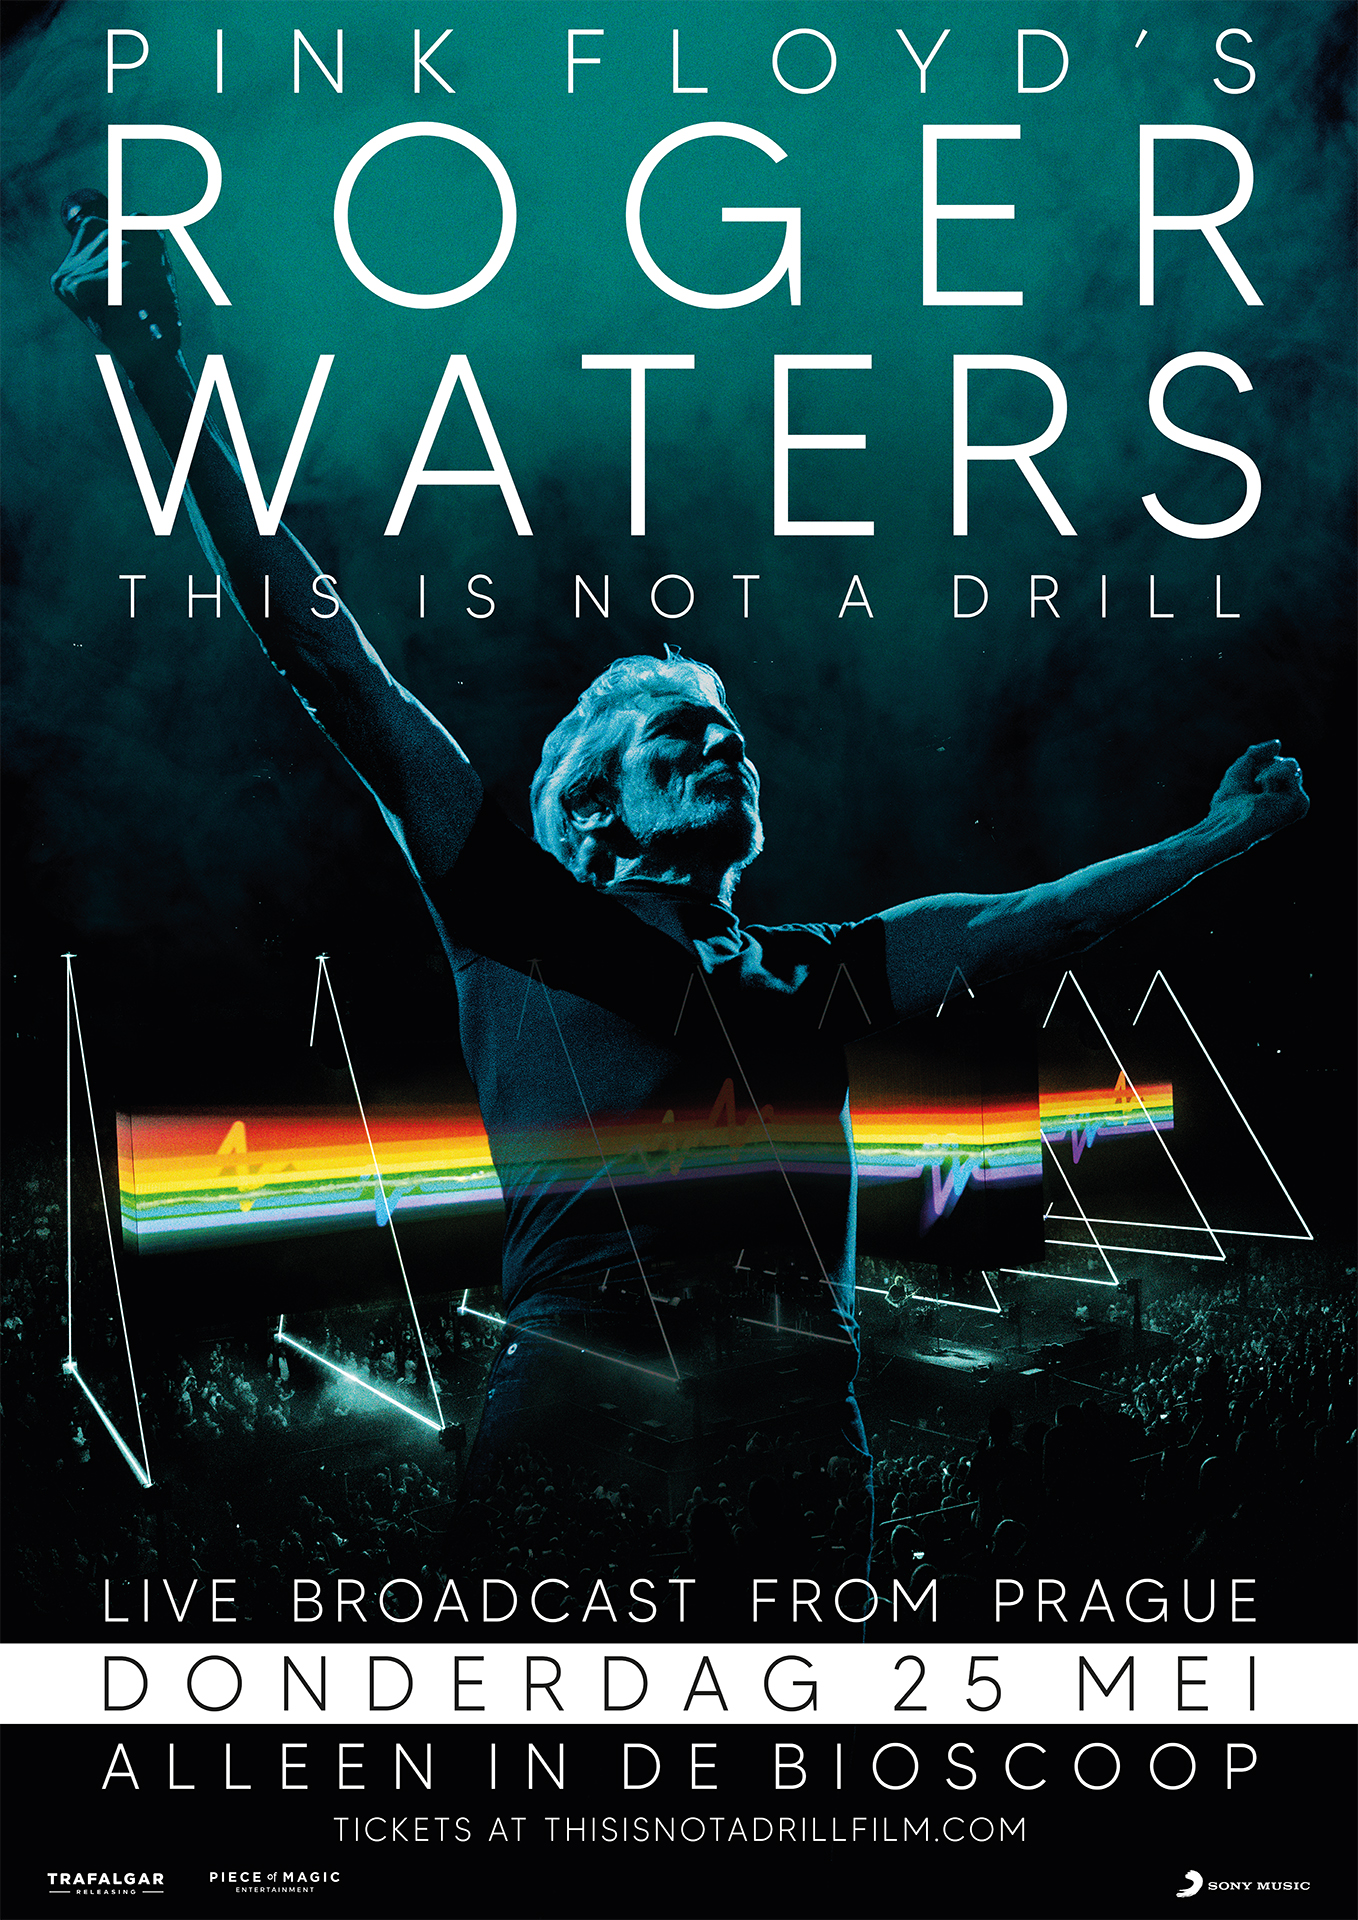 Roger Waters - This is not a Drill - Live from Prague foto